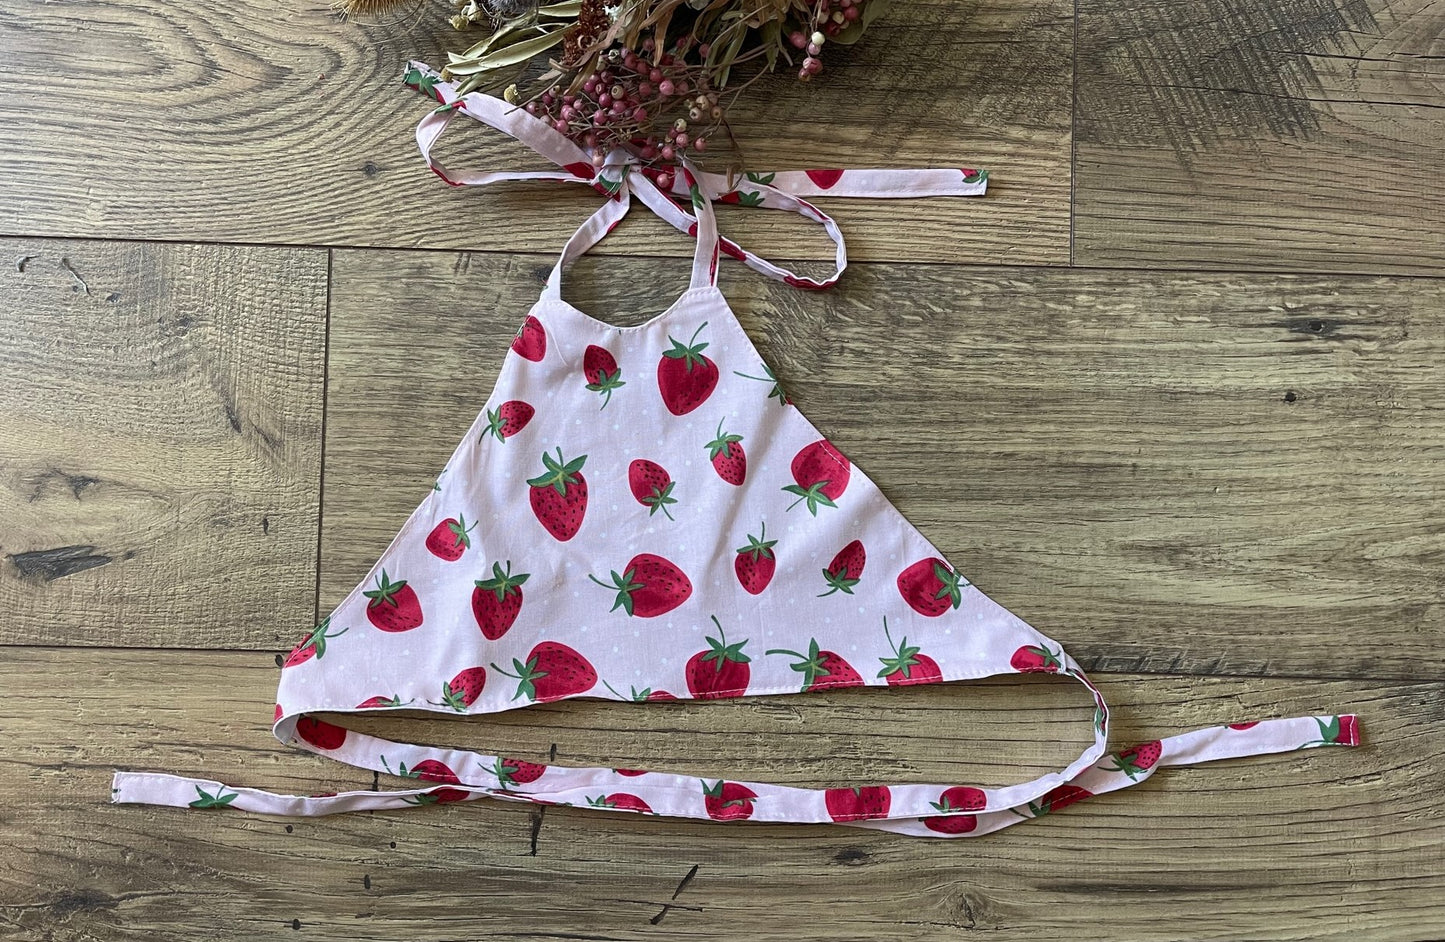 Girls Infant Toddler STRAWBERRY Boho Clothing 2 piece outfit Halter top with shorts